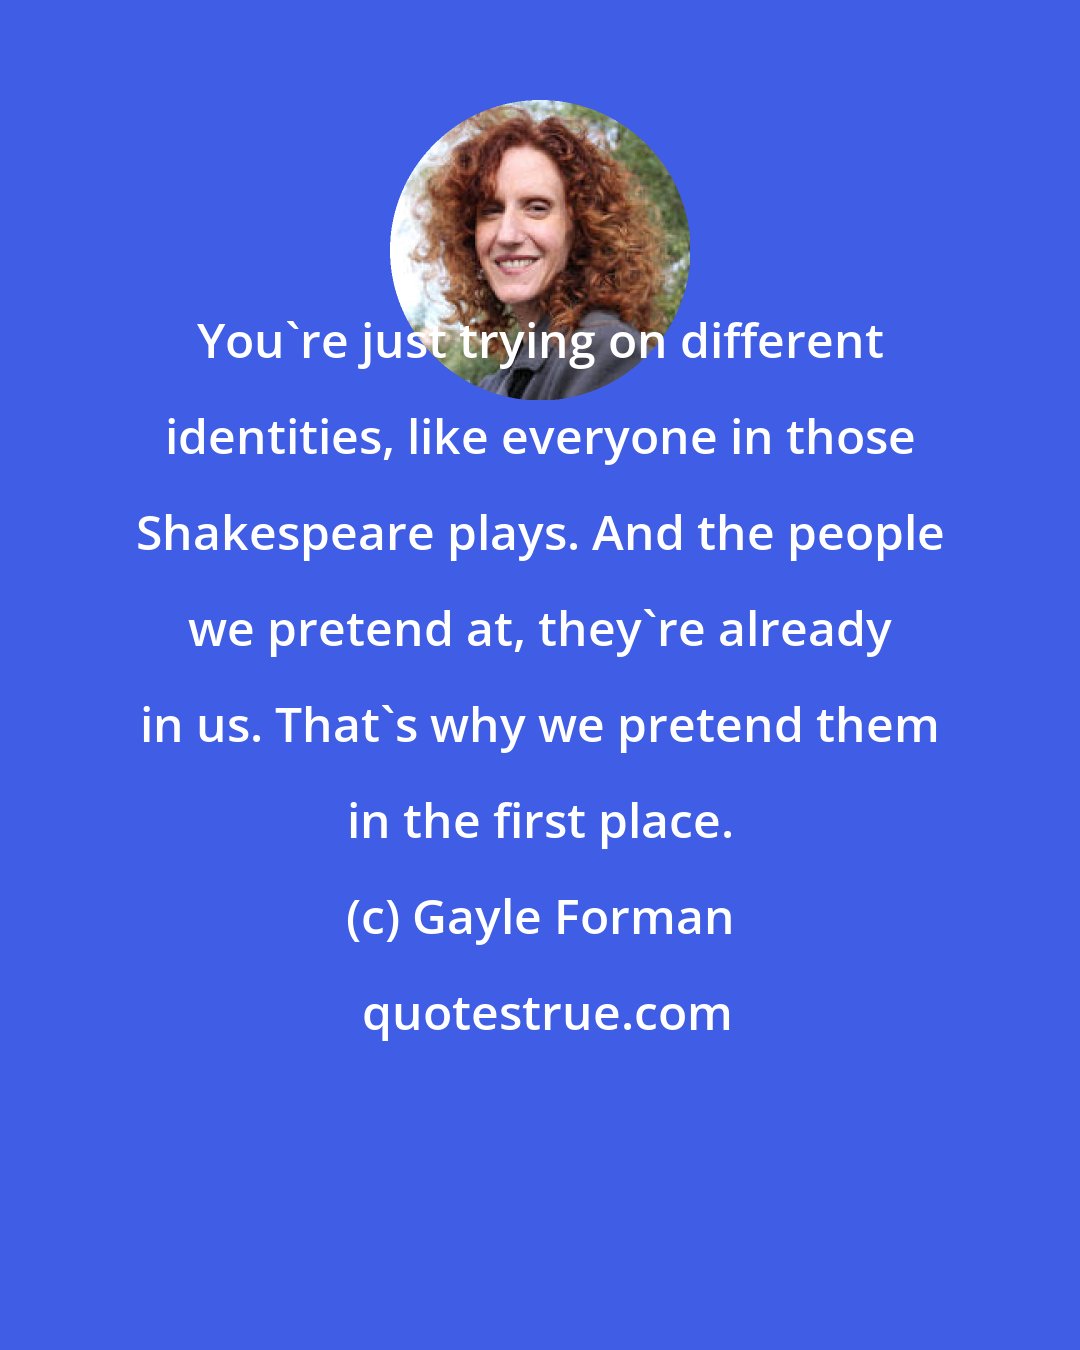 Gayle Forman: You're just trying on different identities, like everyone in those Shakespeare plays. And the people we pretend at, they're already in us. That's why we pretend them in the first place.